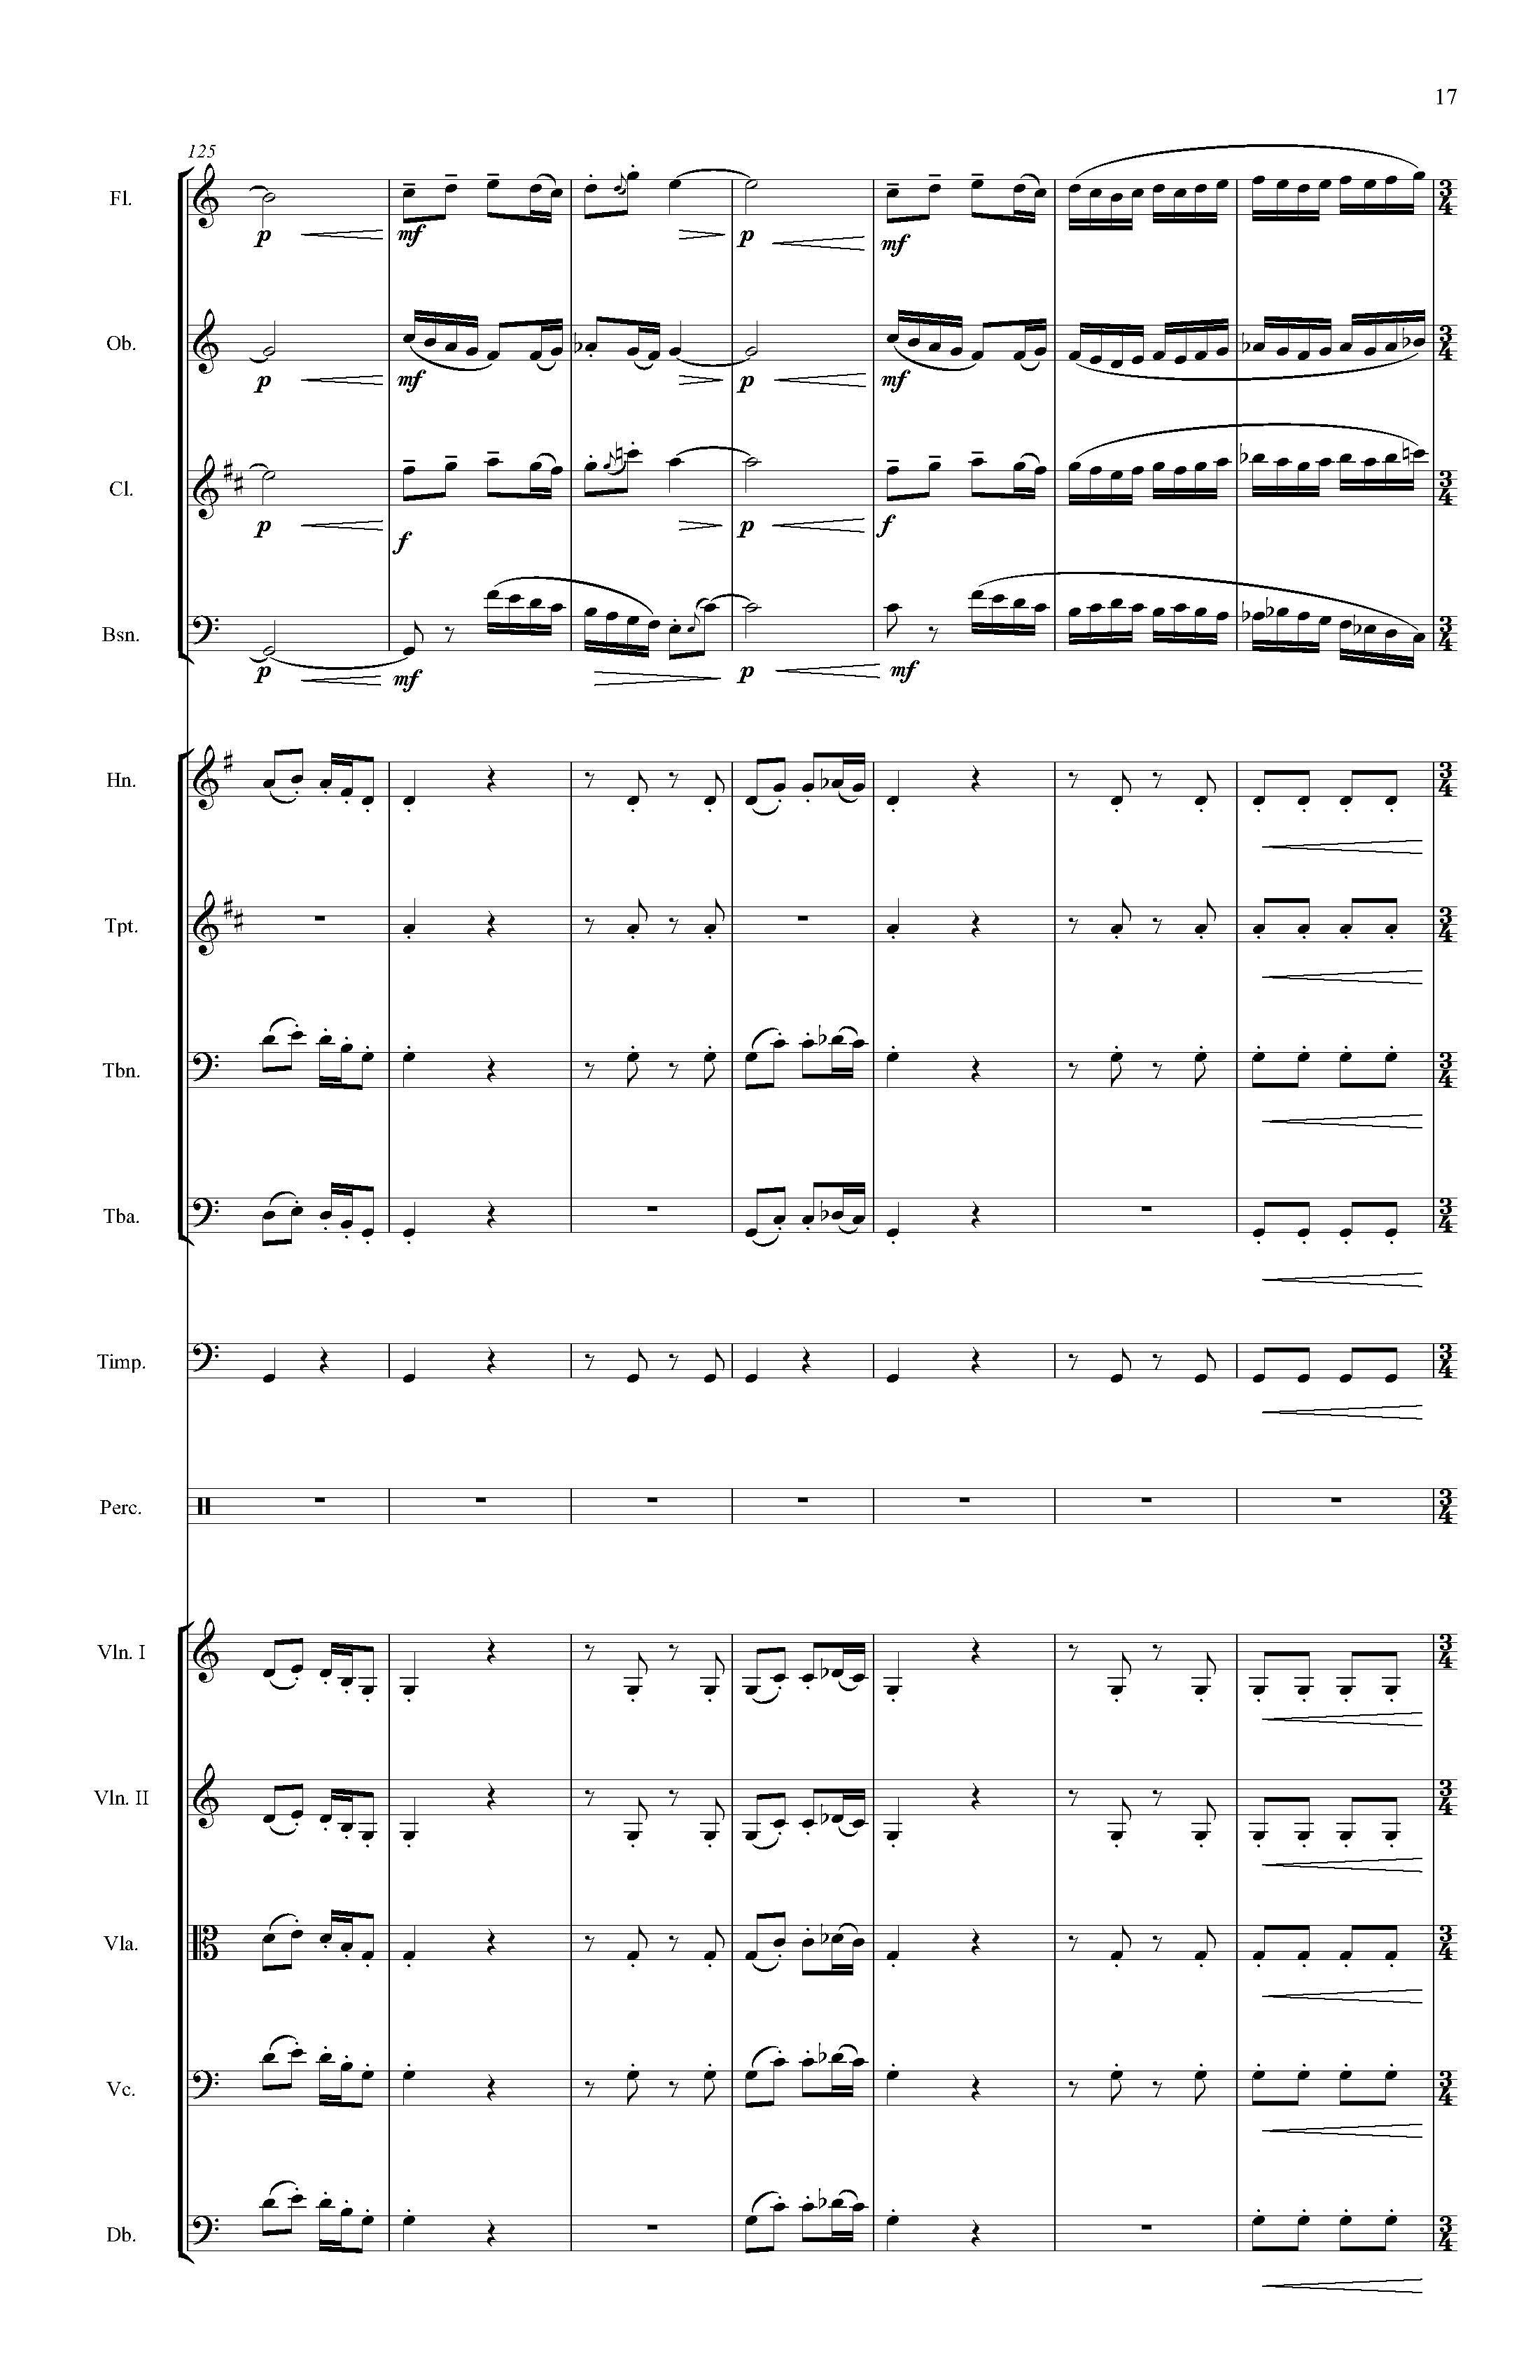 Fantasy on a French Carol - Complete Score_Page_21.jpg